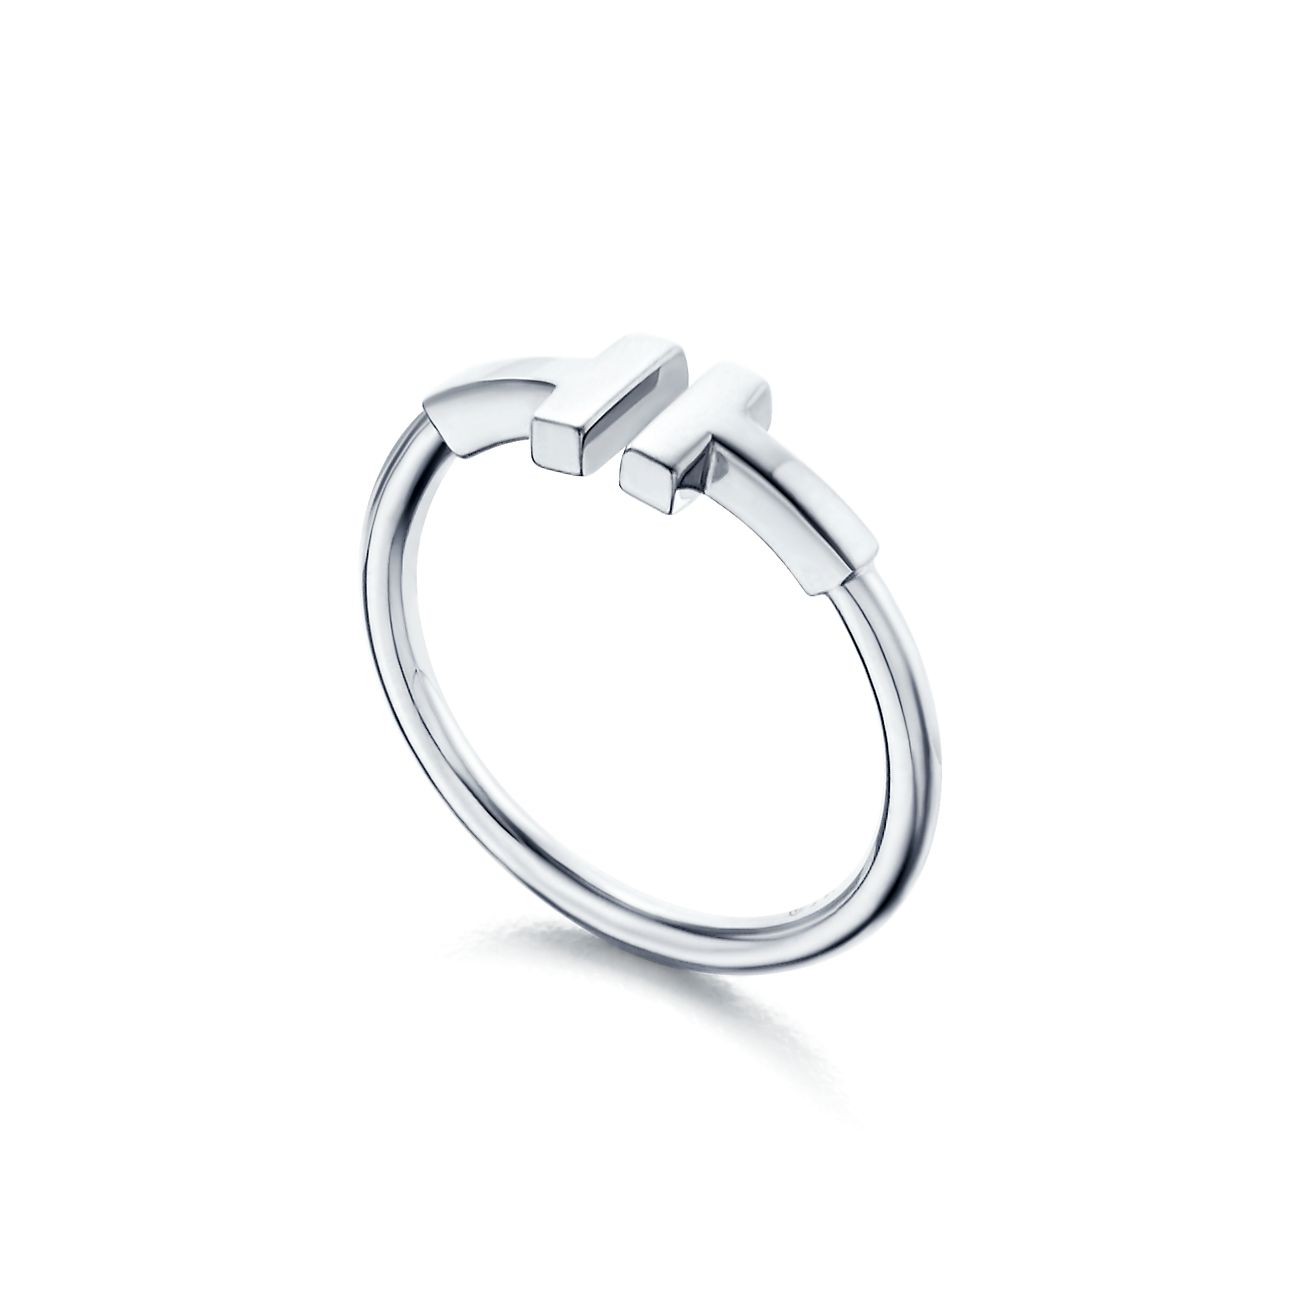 Tiffany T wire ring in 18k white gold 